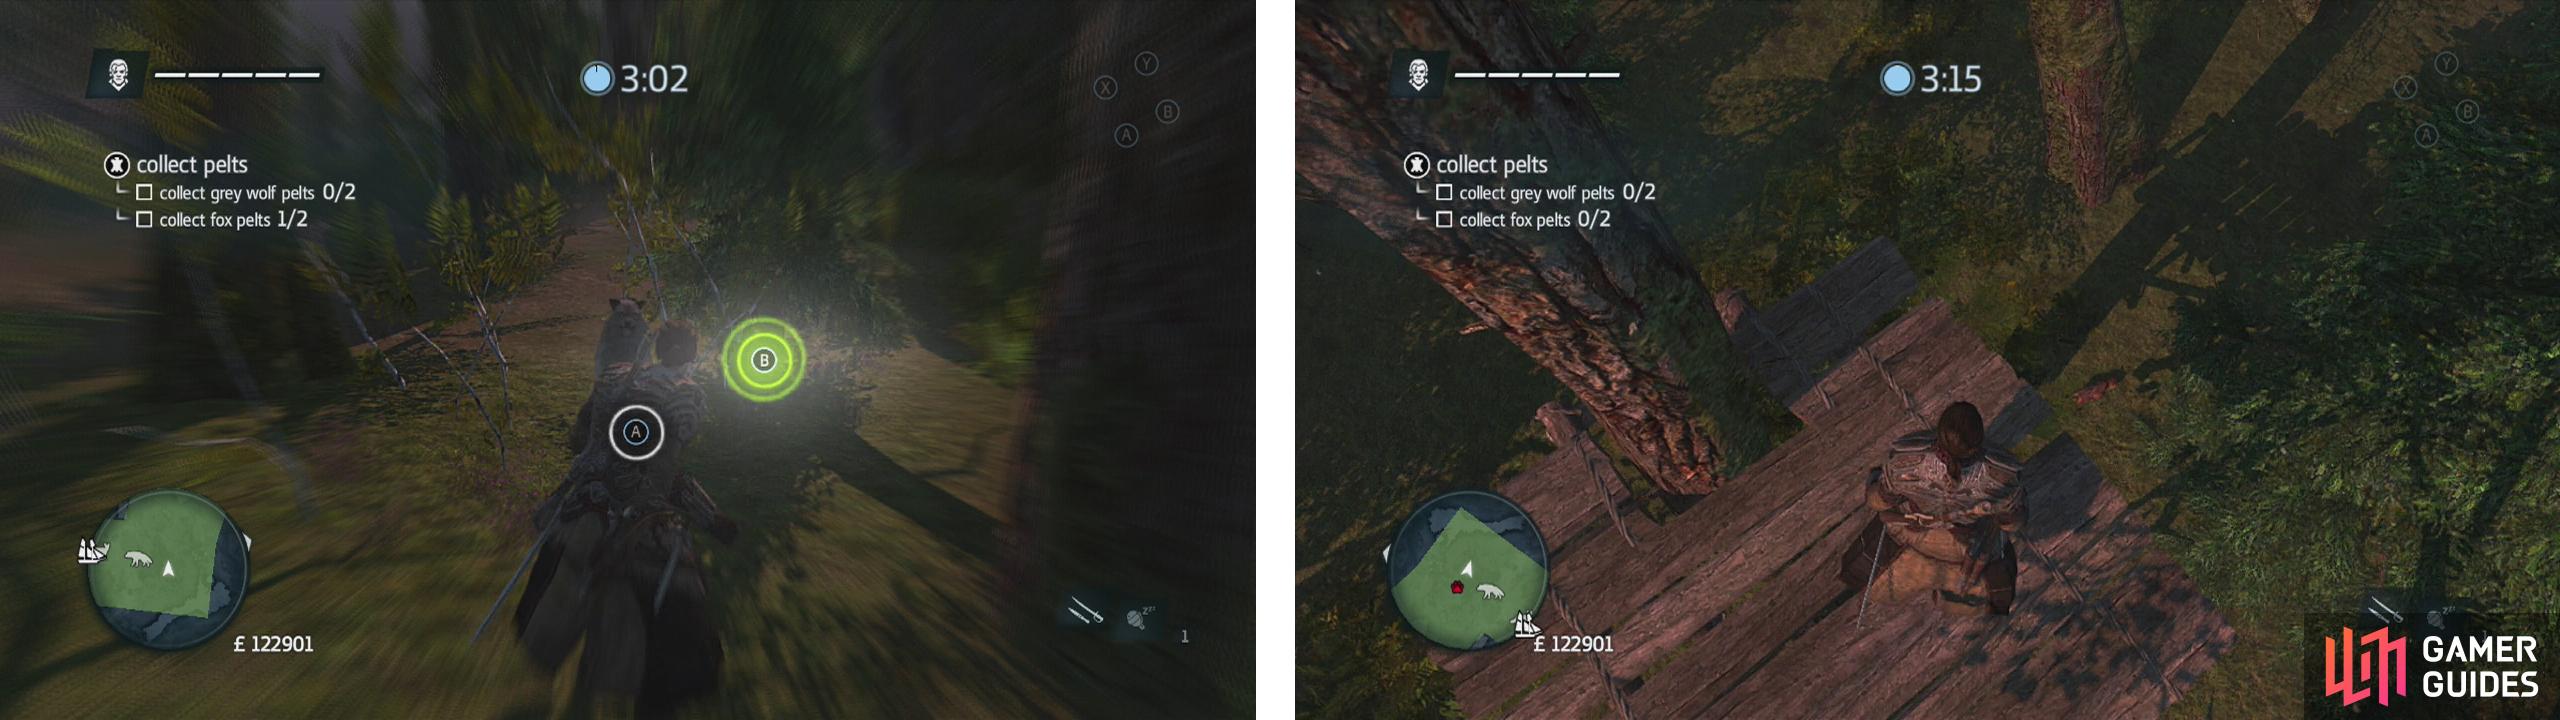 Use air assassinations or tranquilisers to take the foxes down (left). Approach the wolves to have them attack you, hit the button prompts to take them down (right).